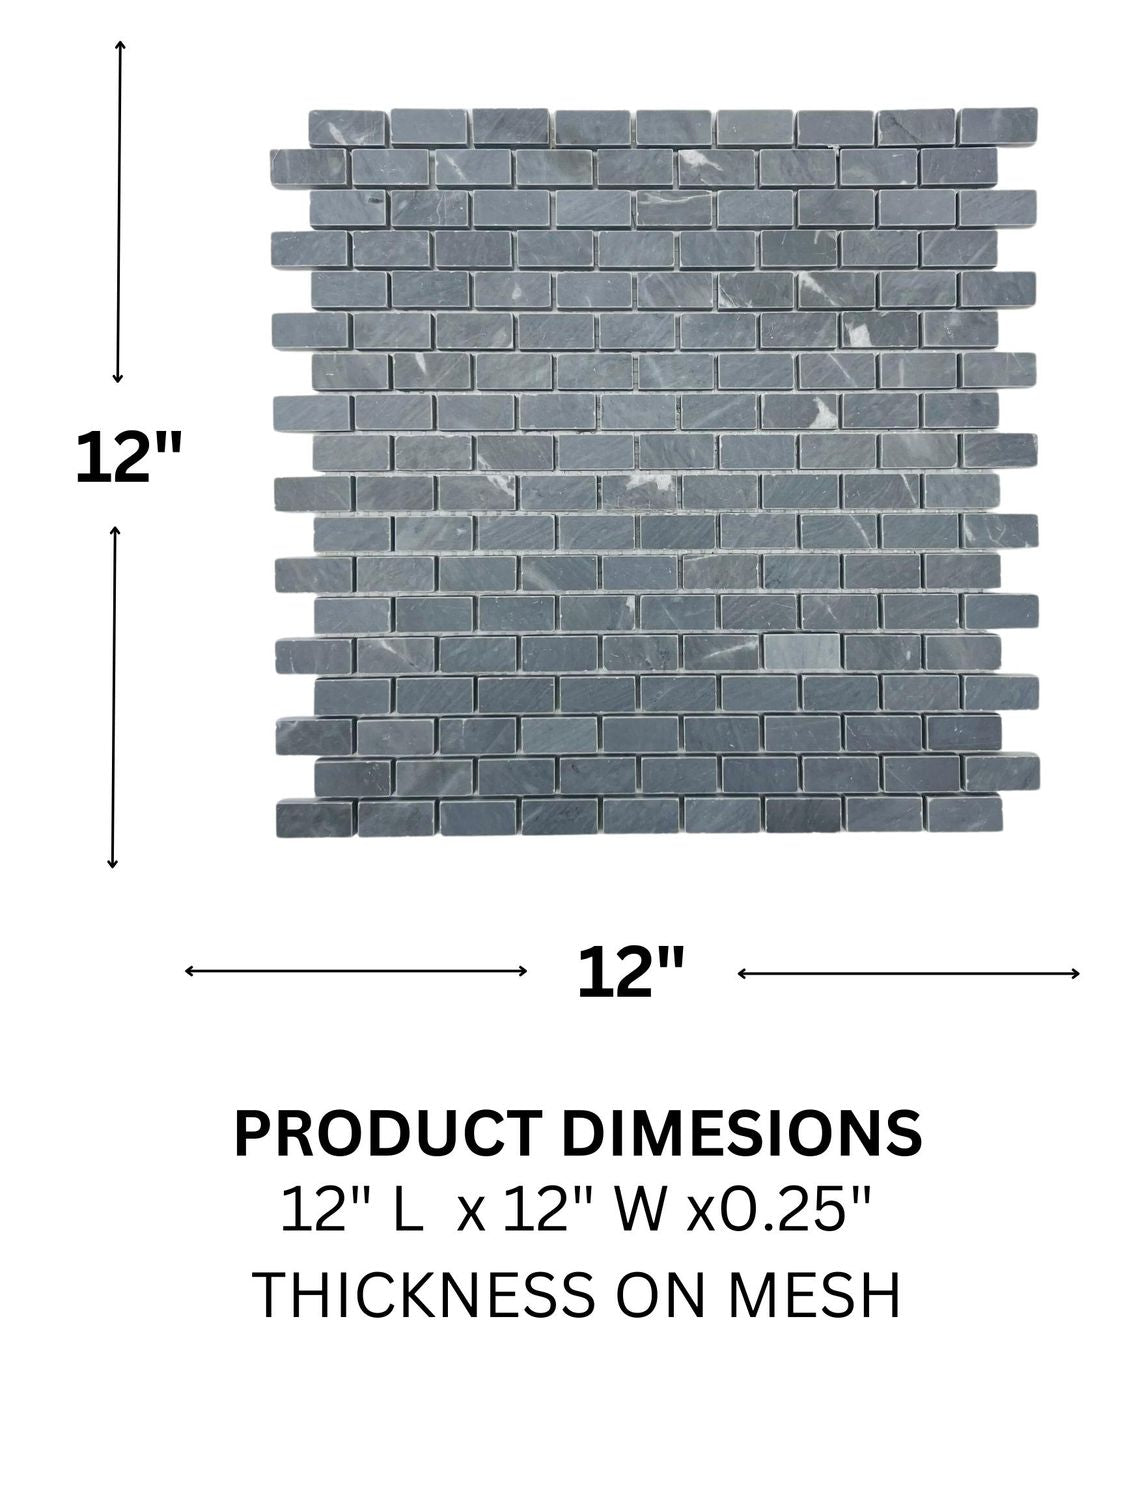 Tenedos TOTTD-BRK-1X2 Ocean Gray 1x2 Brick Honed Marble Flooring Wall Tile for Kitchen Backsplash, Bathroom Wall, Accent Wall, Fireplace Surround